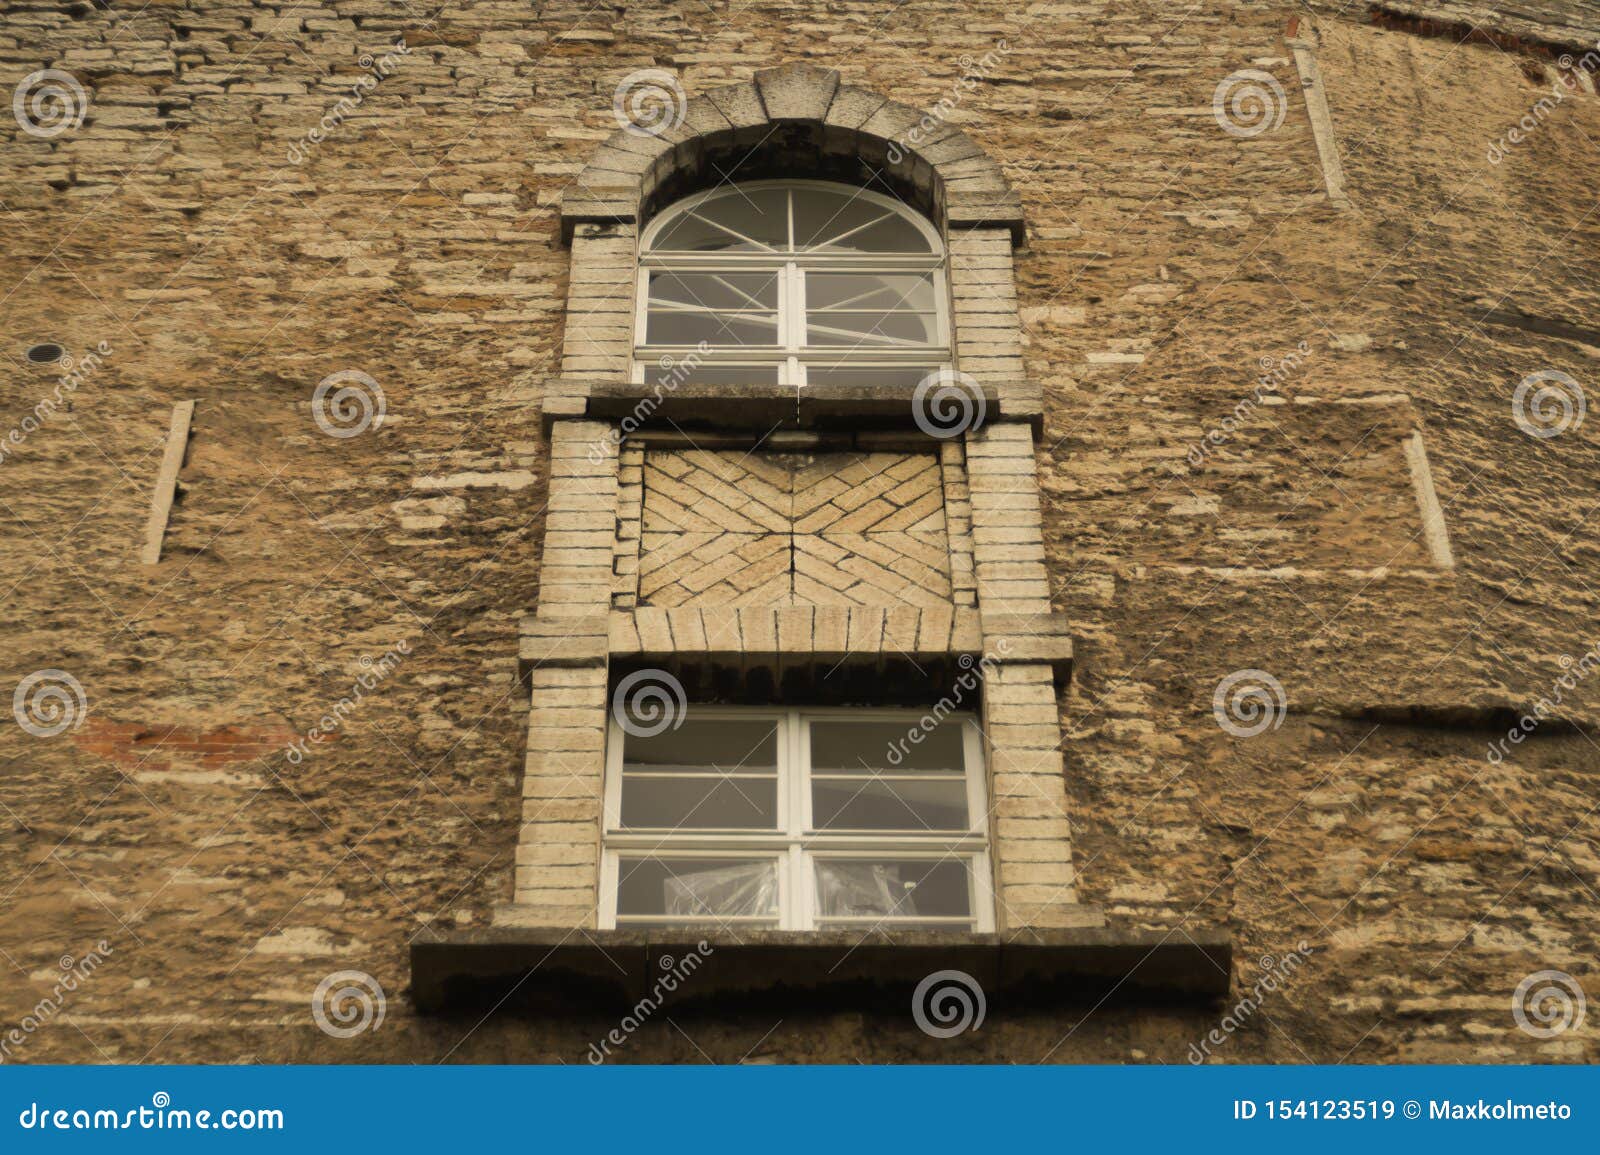 Old Brick Wall with Windows Background Stock Image - Image of brown, home:  154123519